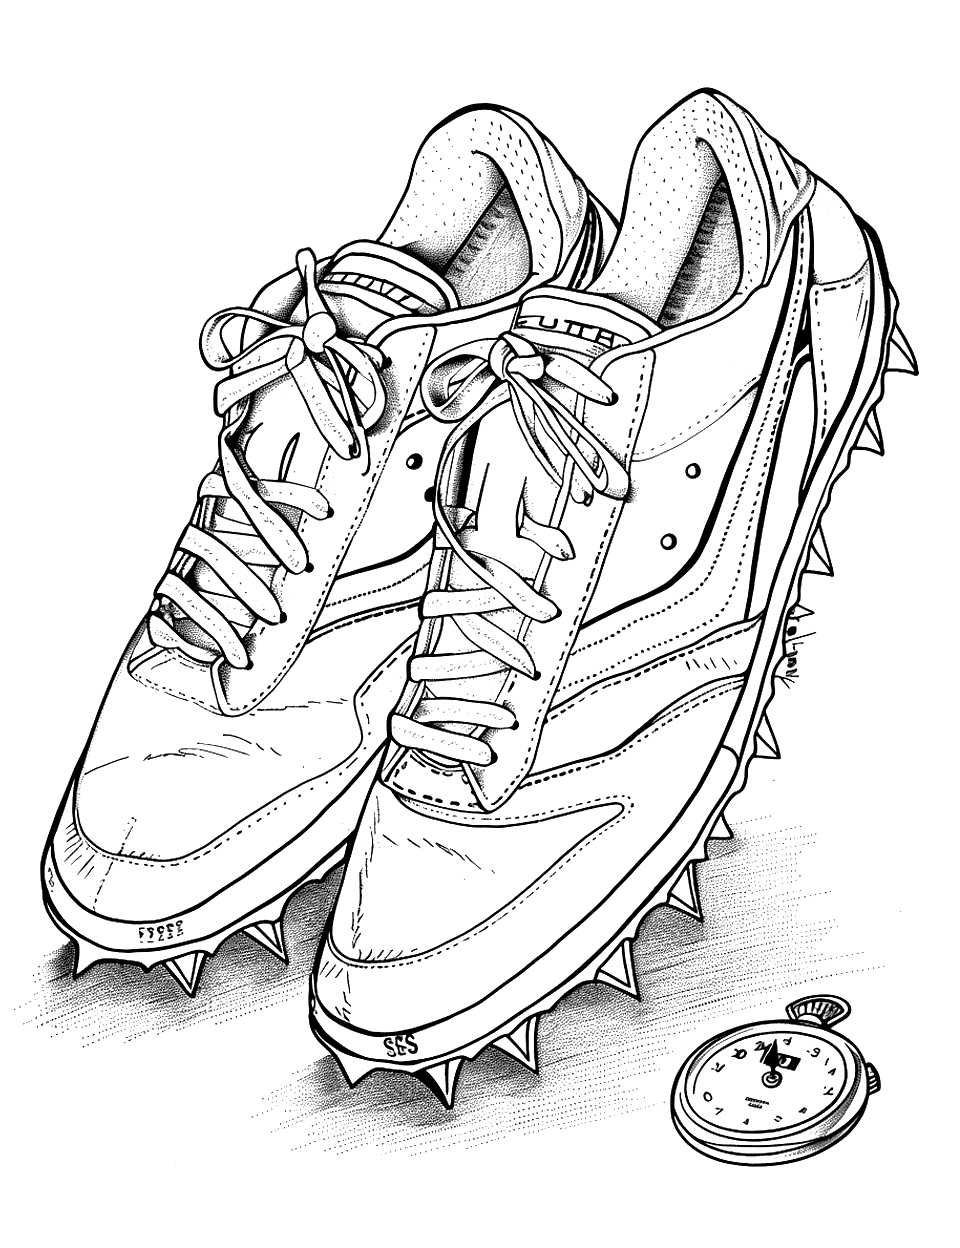 Track Spikes at the Meet Shoe Coloring Page - Track spikes with a stopwatch ready to get put on for sprinting.